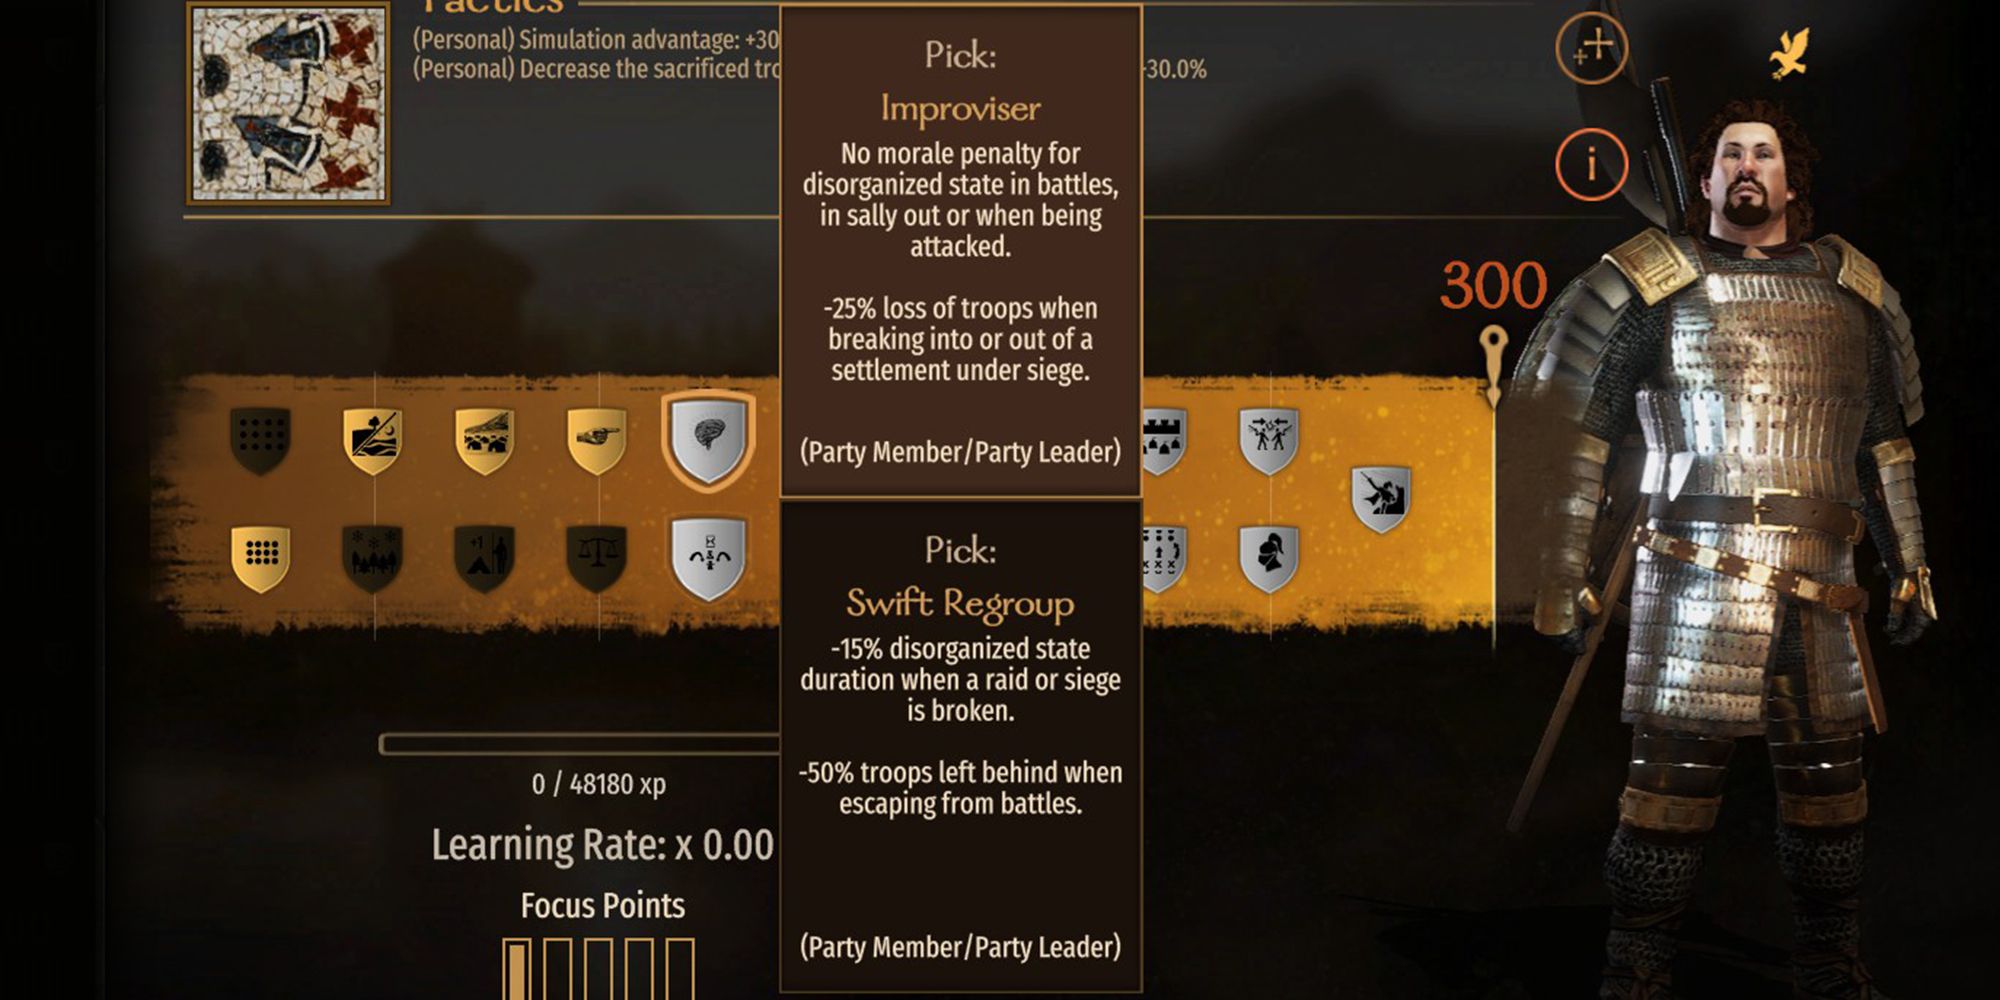 Tactics Improvizer Perks Menu Description There is no morale penalty for fighting, sallying out, or being out of order under attack.  Troop loss -25% when infiltrating or escaping a besieged settlement.